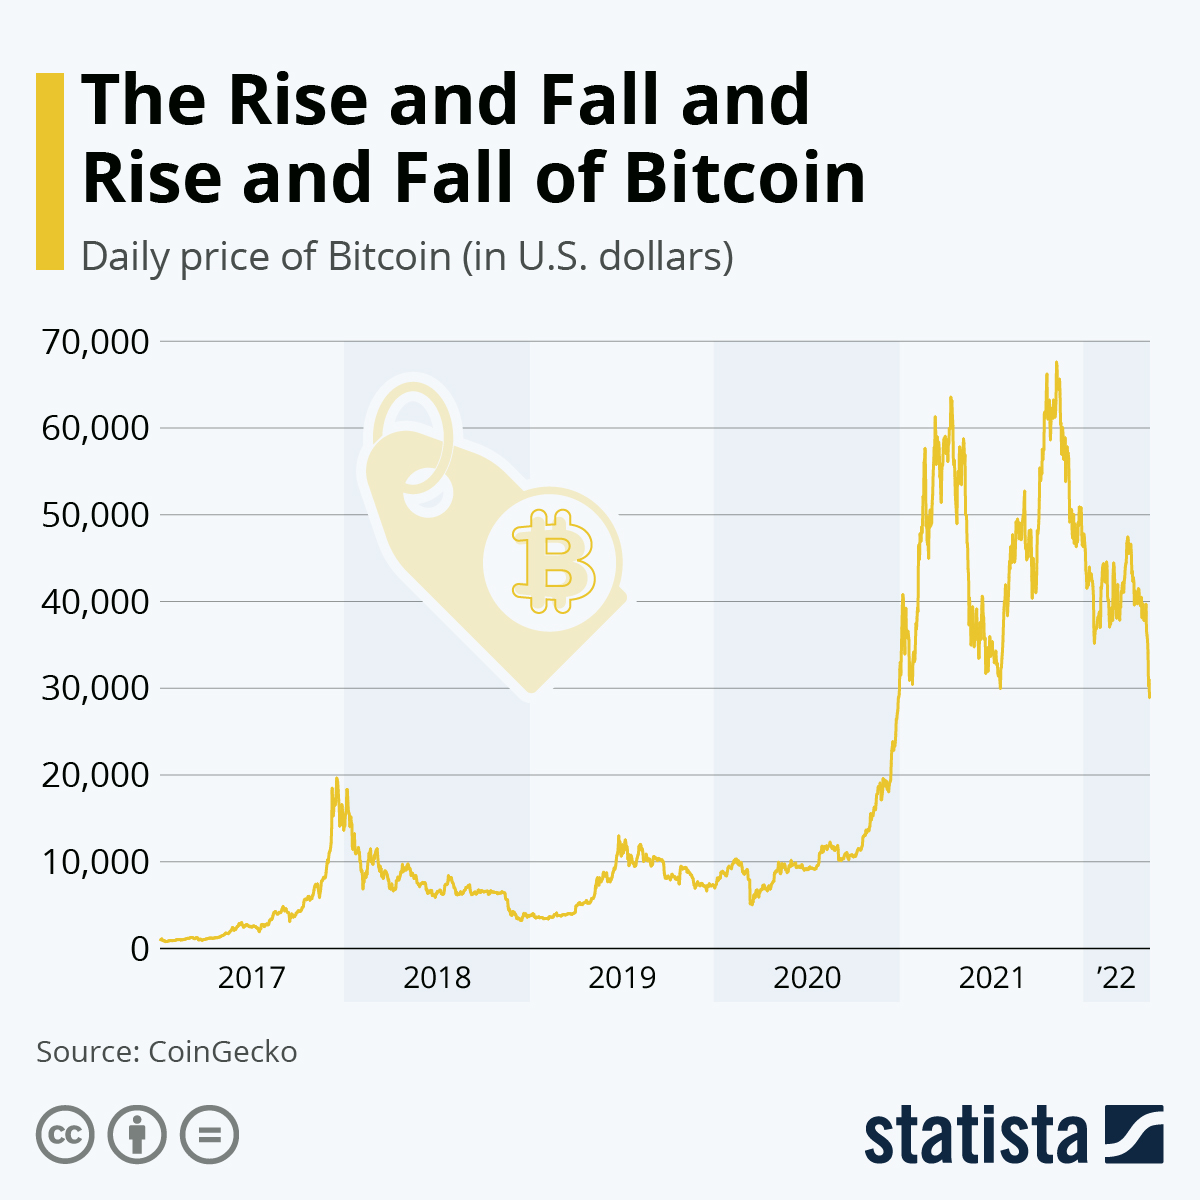 Why has been an awesome year for the Bitcoin price